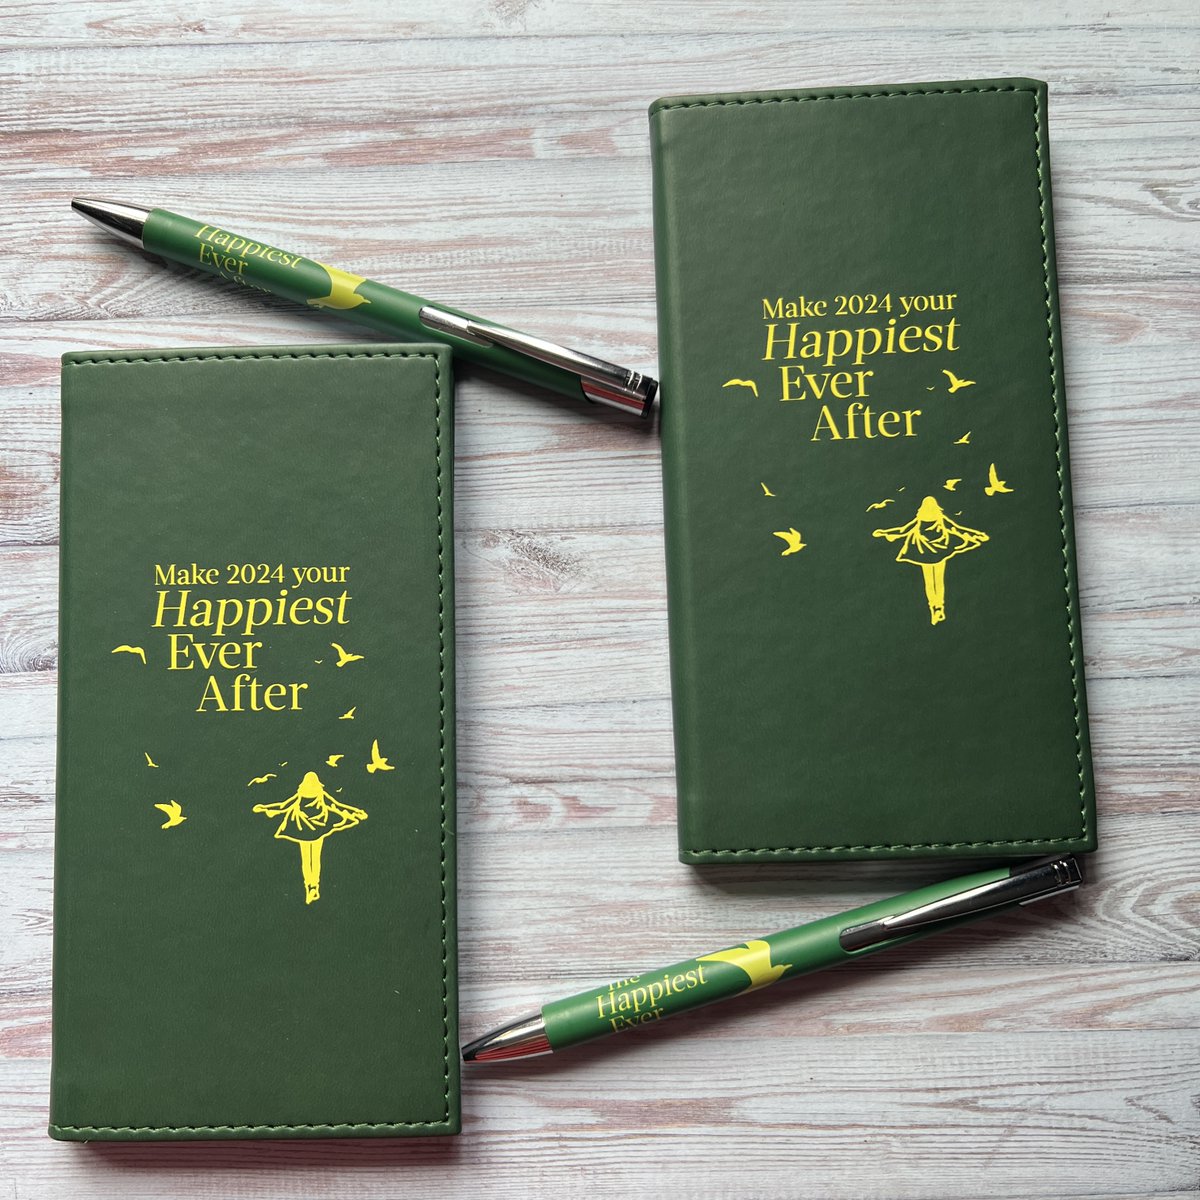 Preorder #TheHappiestEverAfter & you'll get a free chunk of Daily Trumpets immediately after applying for them (details here - dead easy! millyjohnson.co.uk/the-happiest-e… ) Also I have 2 diaries and pens to give away. Like this comment & RT - I'll announce the winner on here Sunday am.